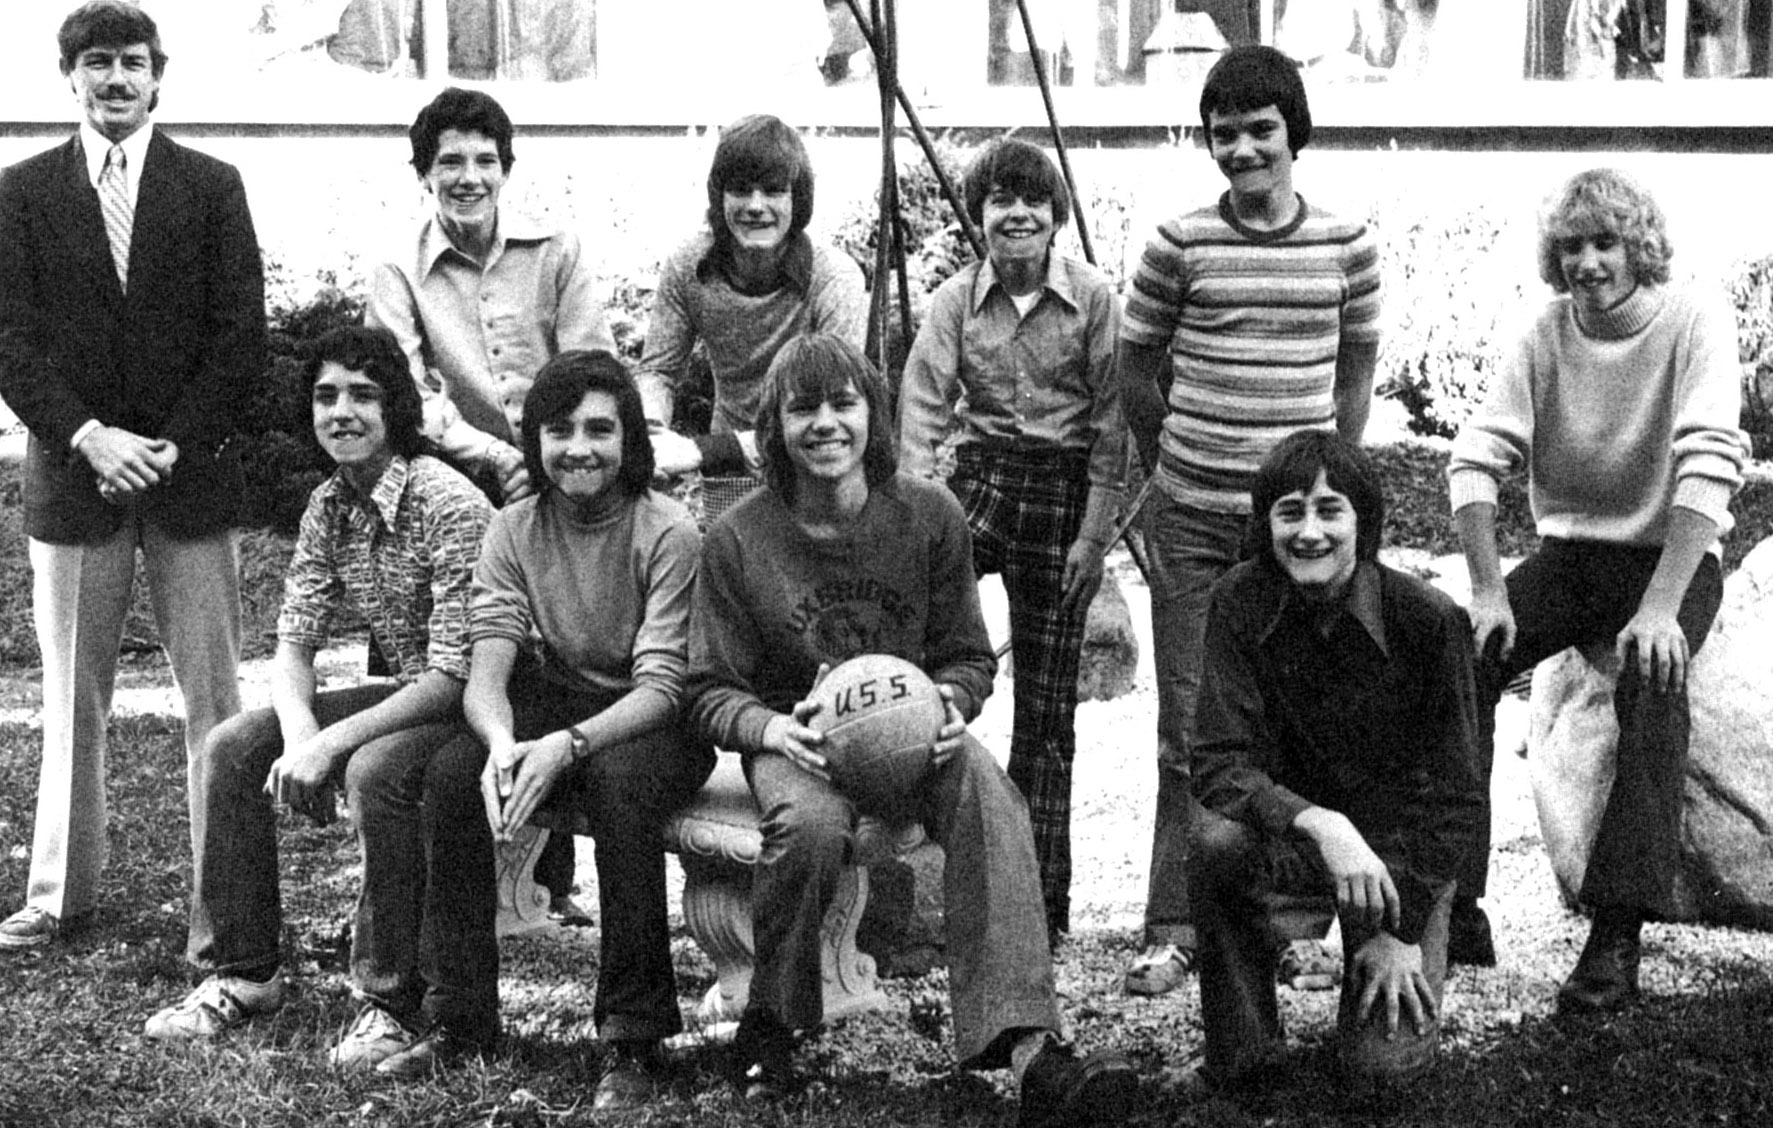 (Click to magnify) FRONT ROW: D. Schembri, G. Gates, B. Joosten, D. Cain; BACK ROW: Mr. Chuck Thompson (coach), S. Horton, G. Catherwood, L. Hall, P. Gouweleeuw, J. Whitehead.